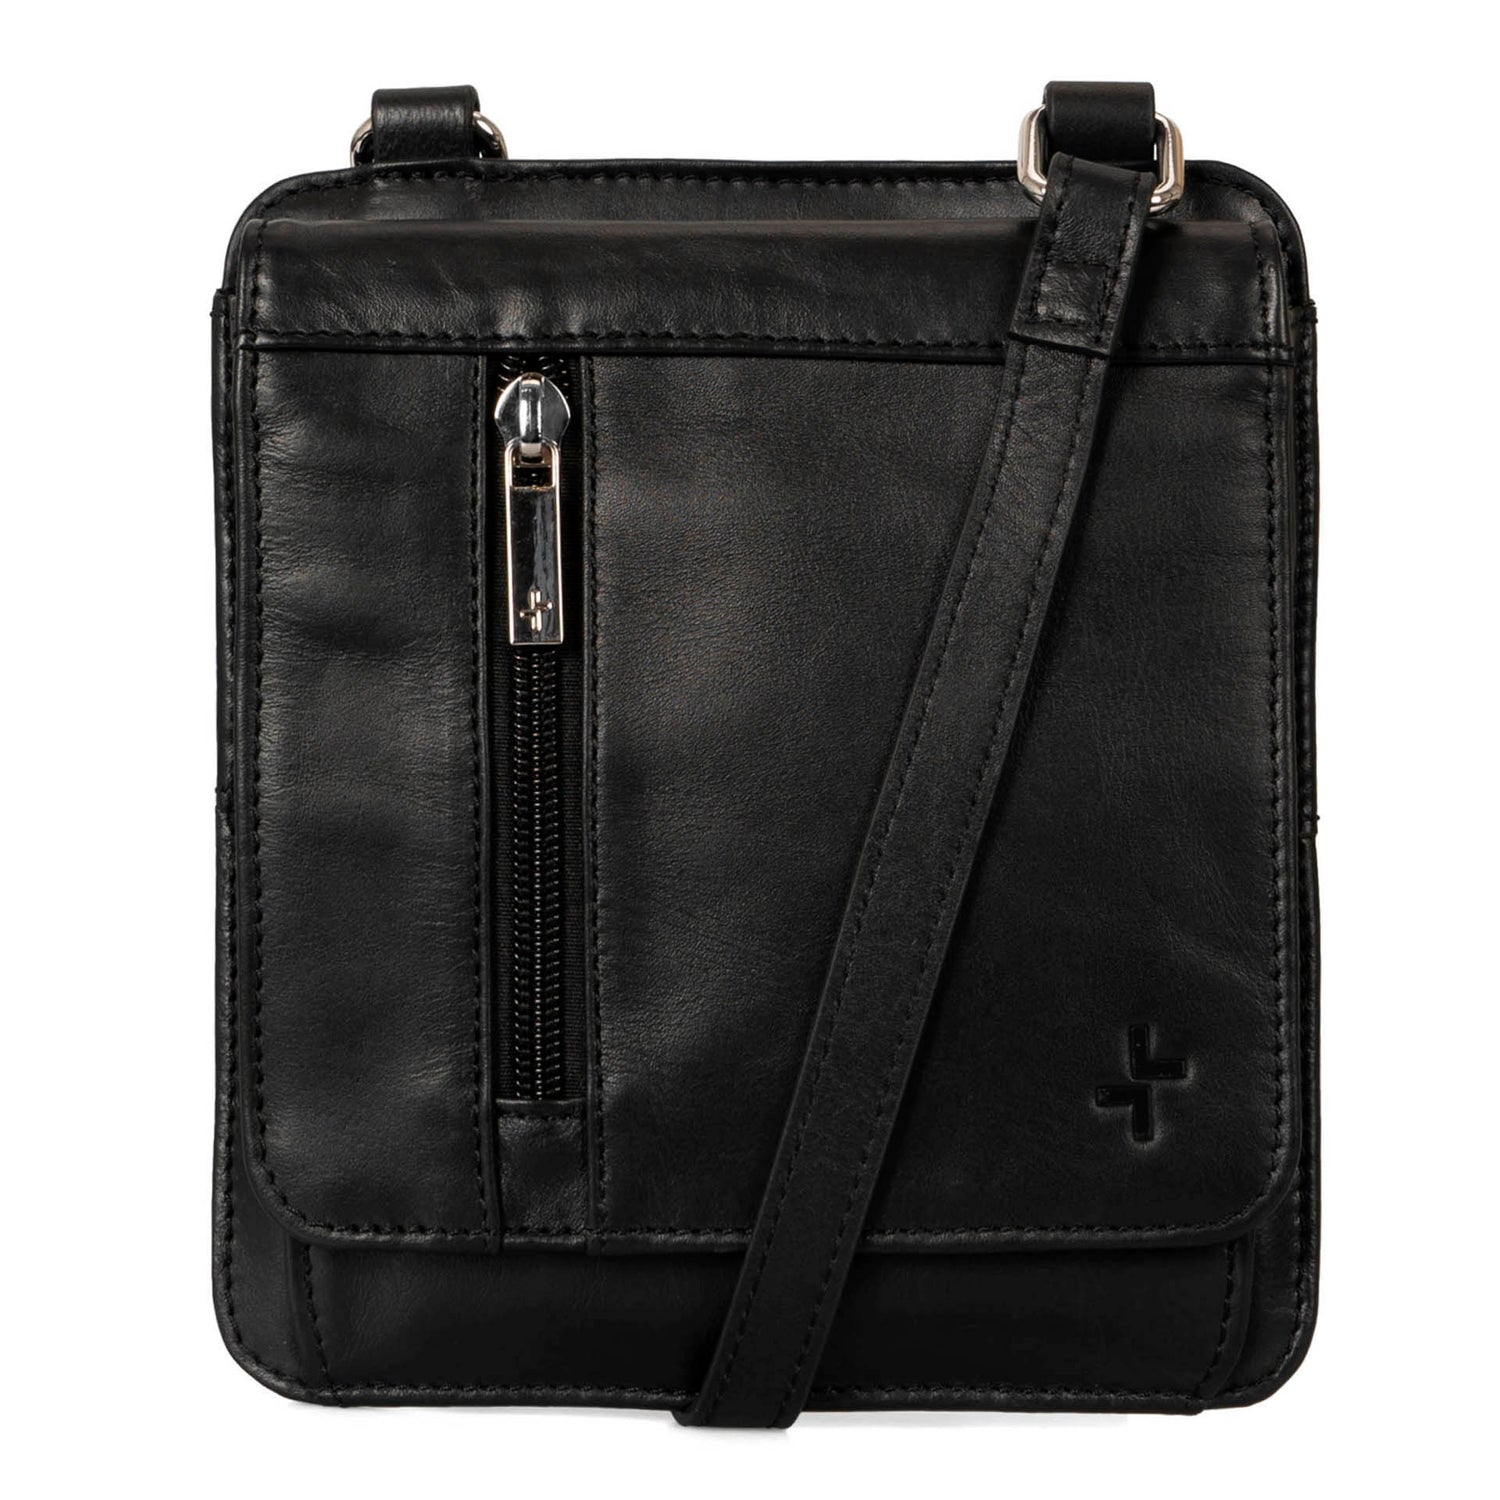 Front view of a black slim crossobdy bag called Basics designed by Tracker showing its supple leather, crossbody strap, and exterior zipper pocket.